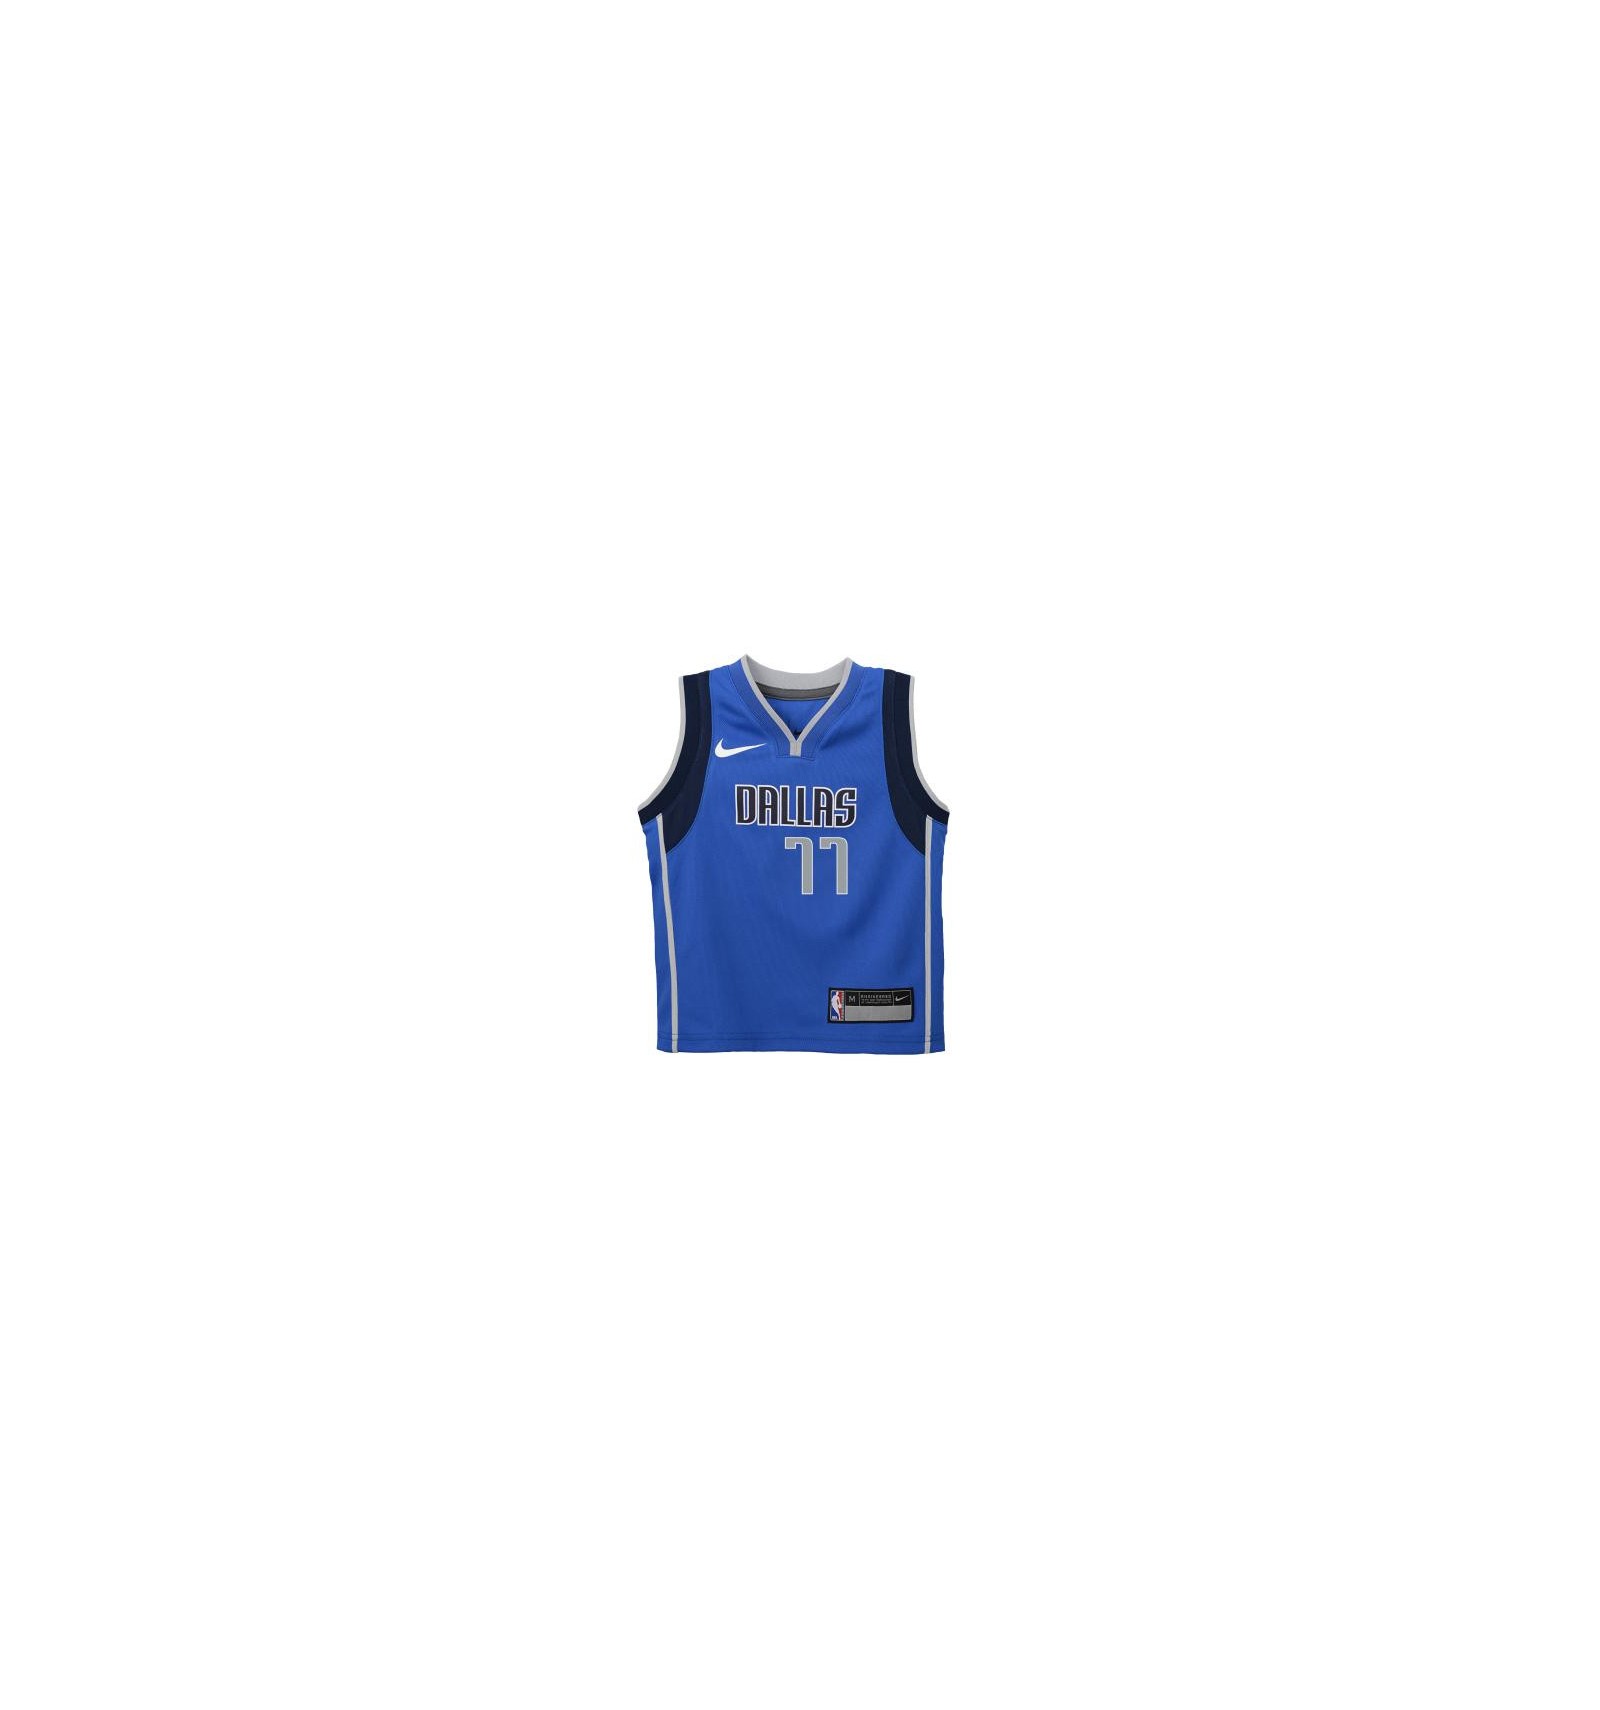 Jersey Nike Replica Luka Doncic icon cadet